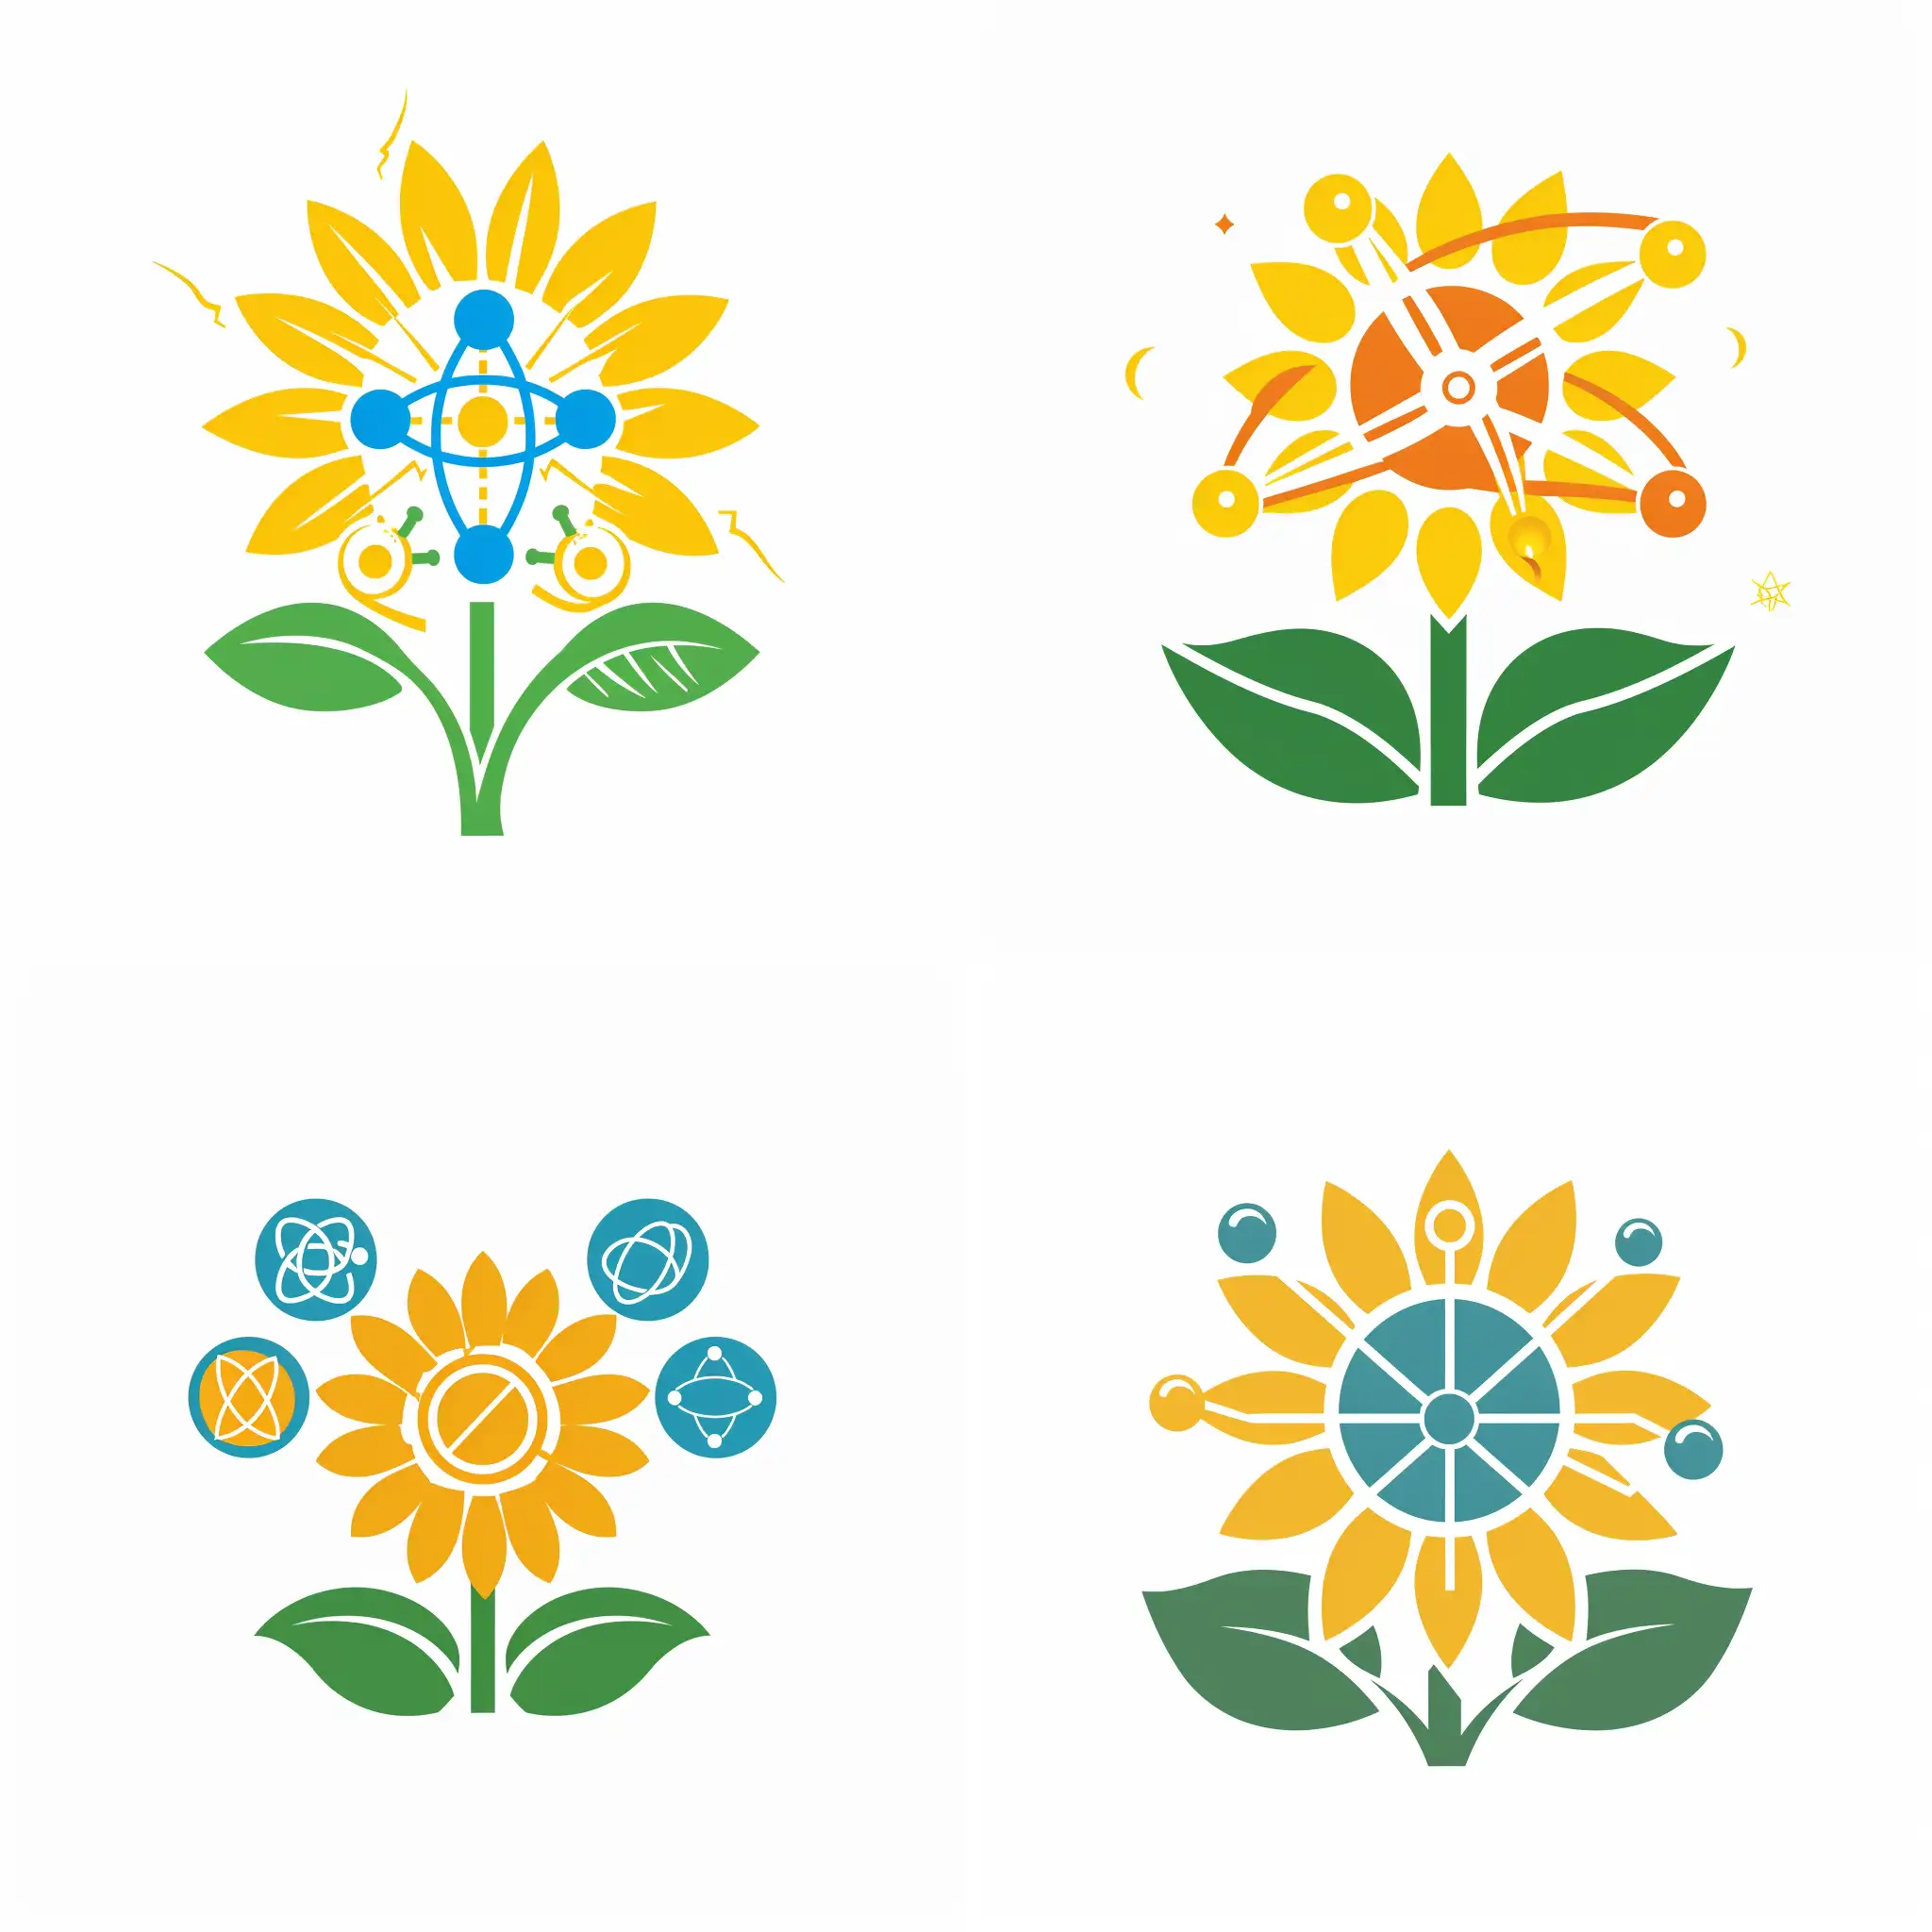 EcoFriendly-Energy-Logo-Sunflower-Atomic-Structure-and-Clean-Air-Design